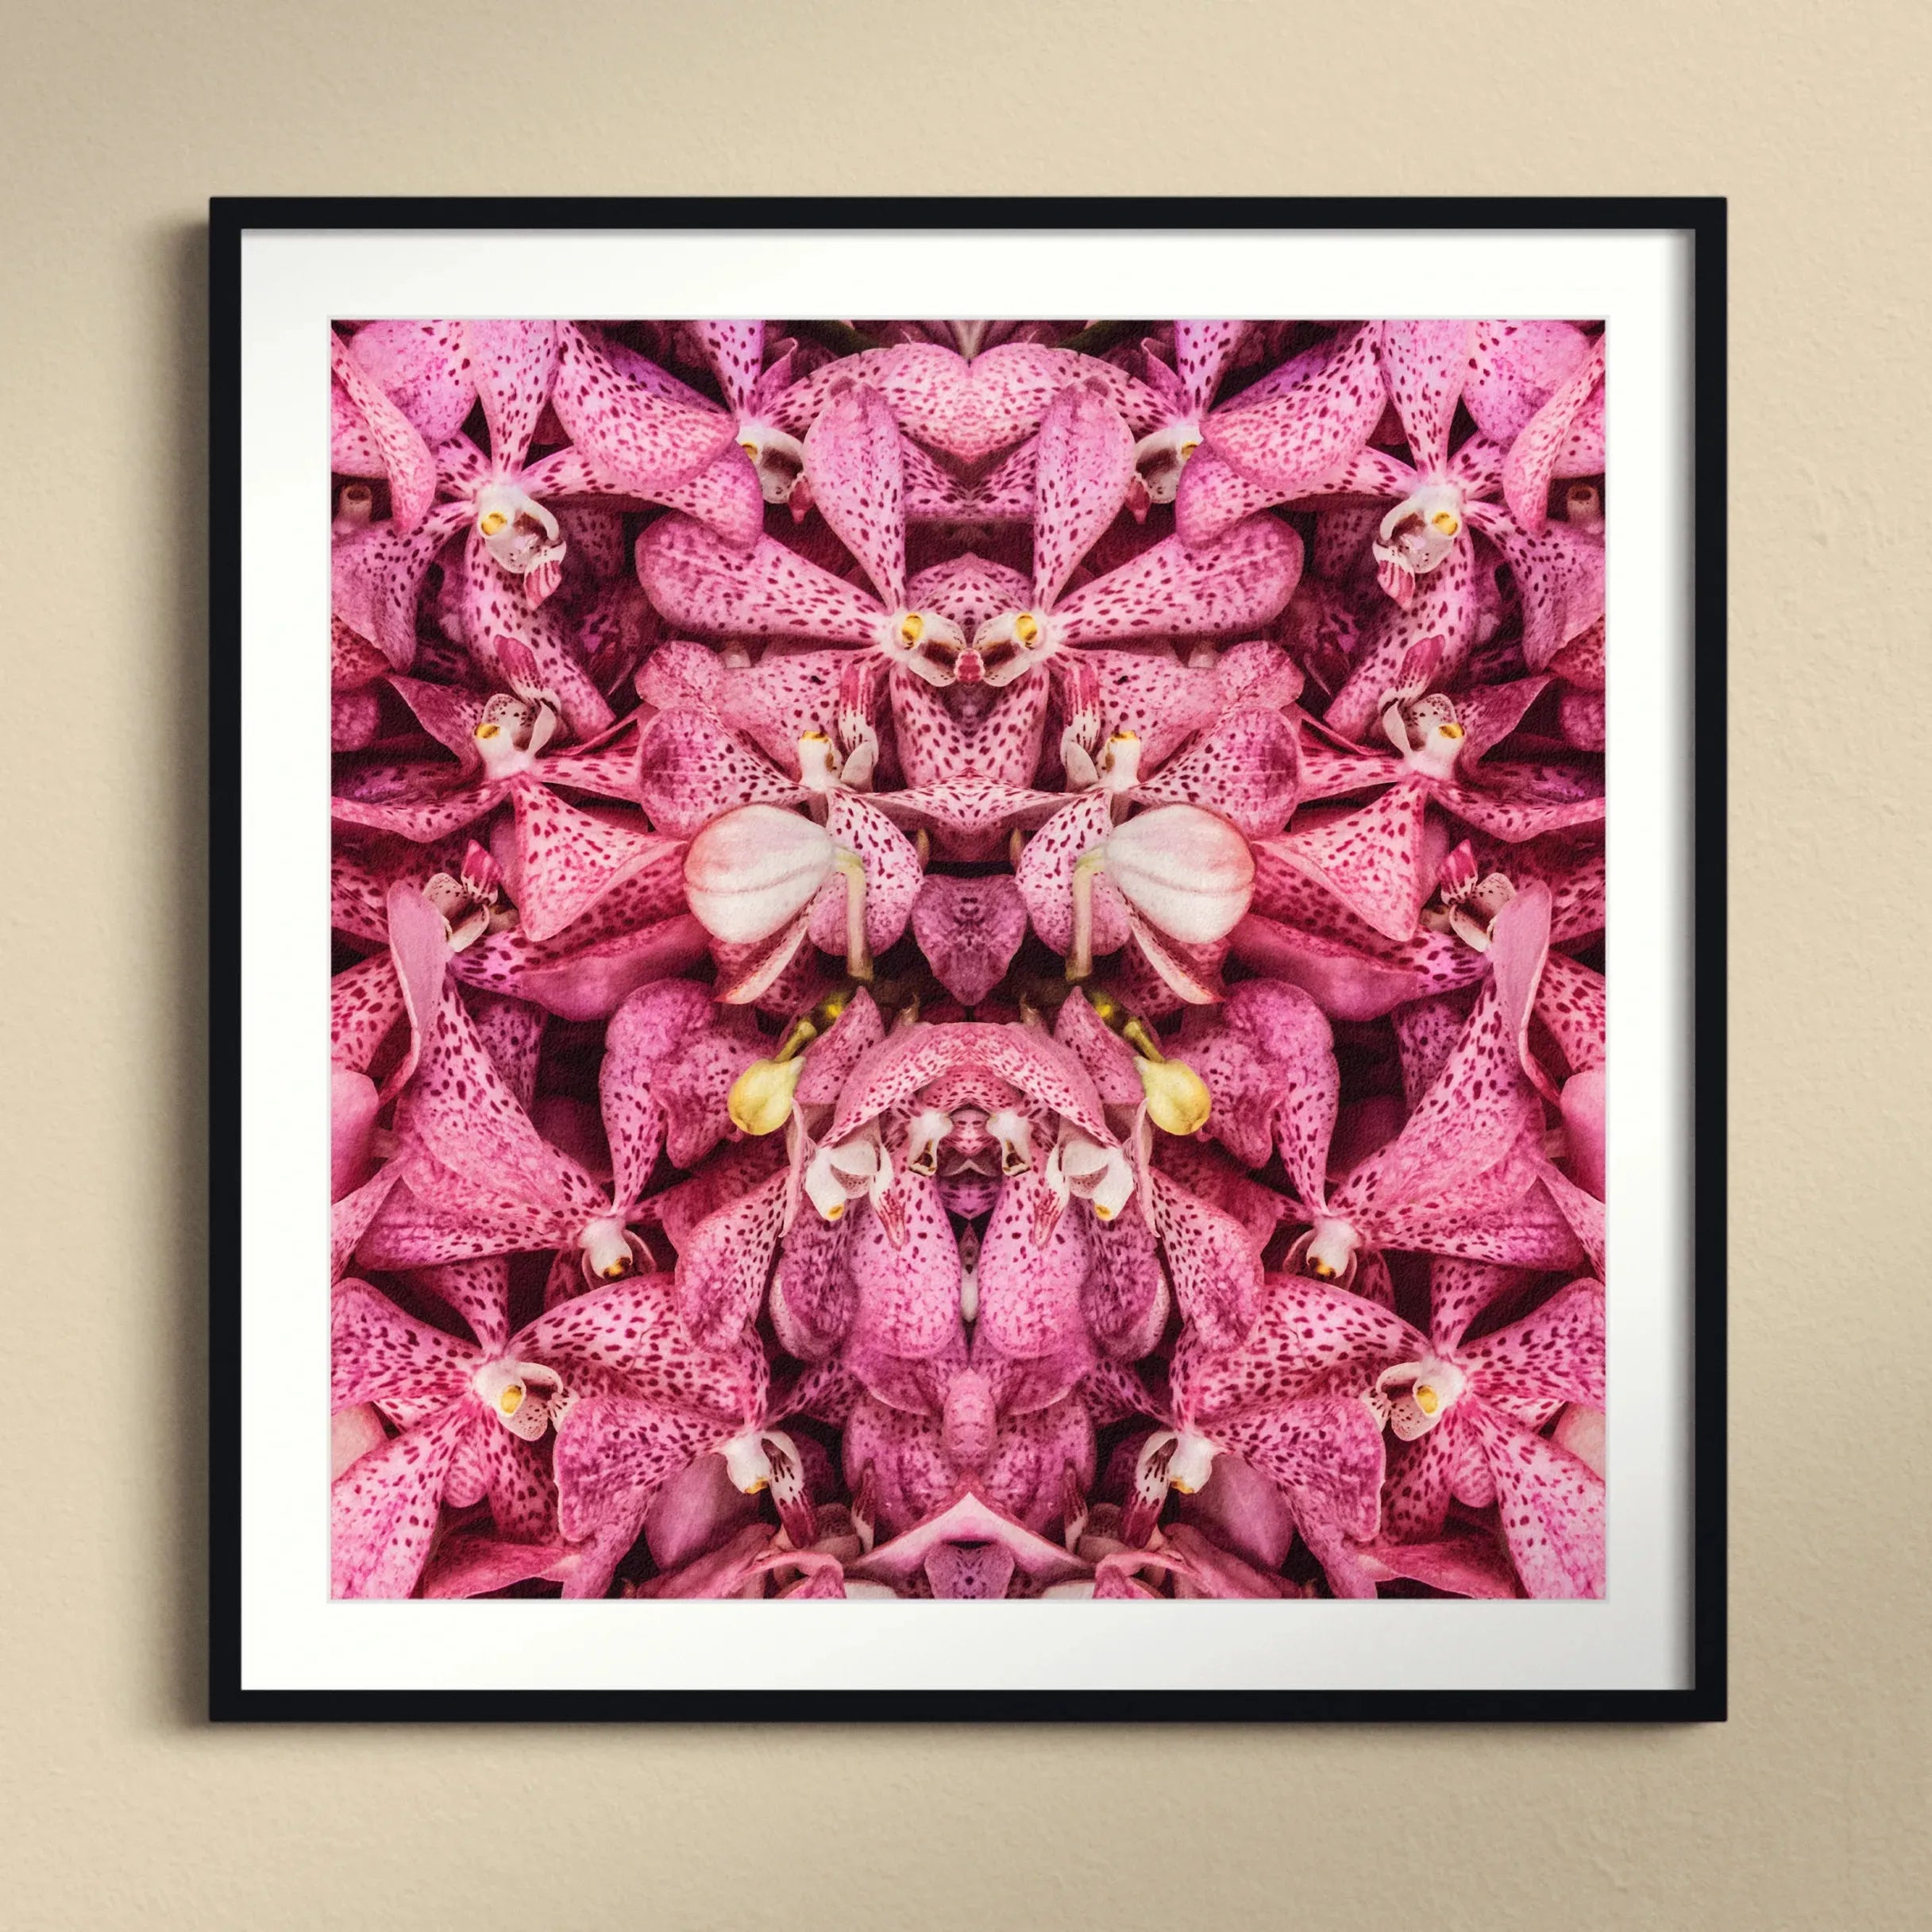 Tickled Pink Framed & Mounted Print - Posters Prints & Visual Artwork - Aesthetic Art